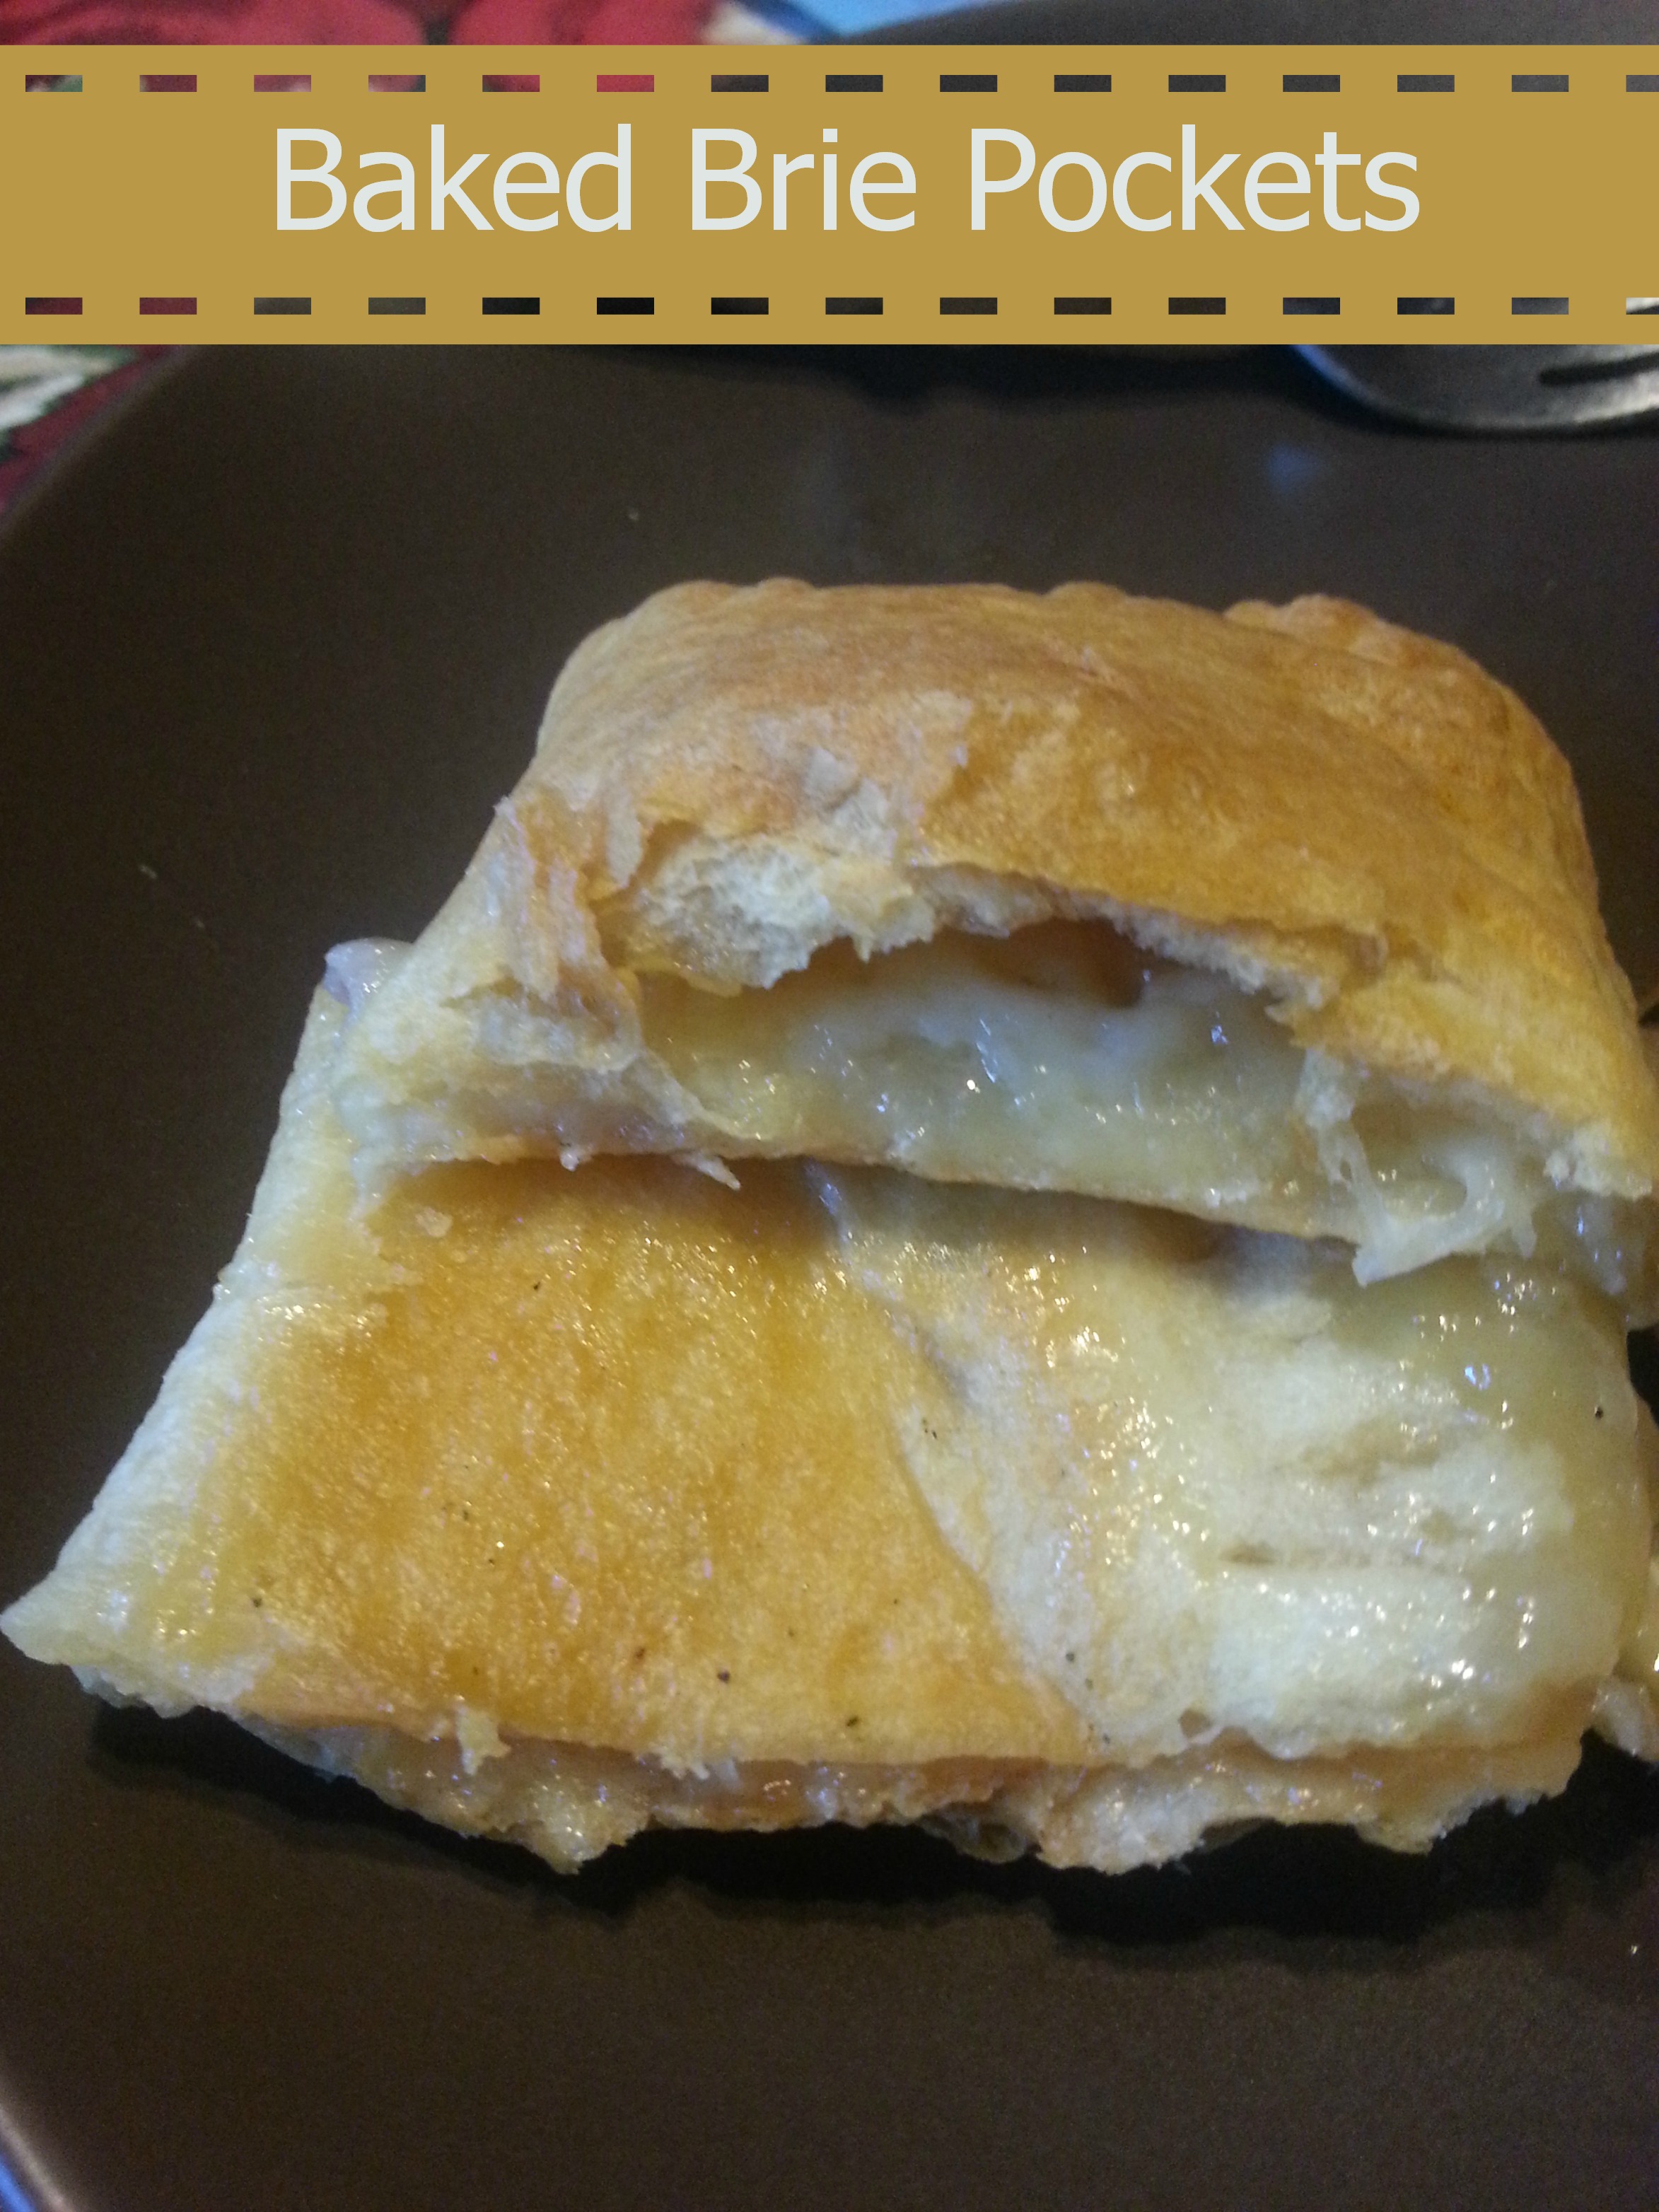 Baked Brie Pockets